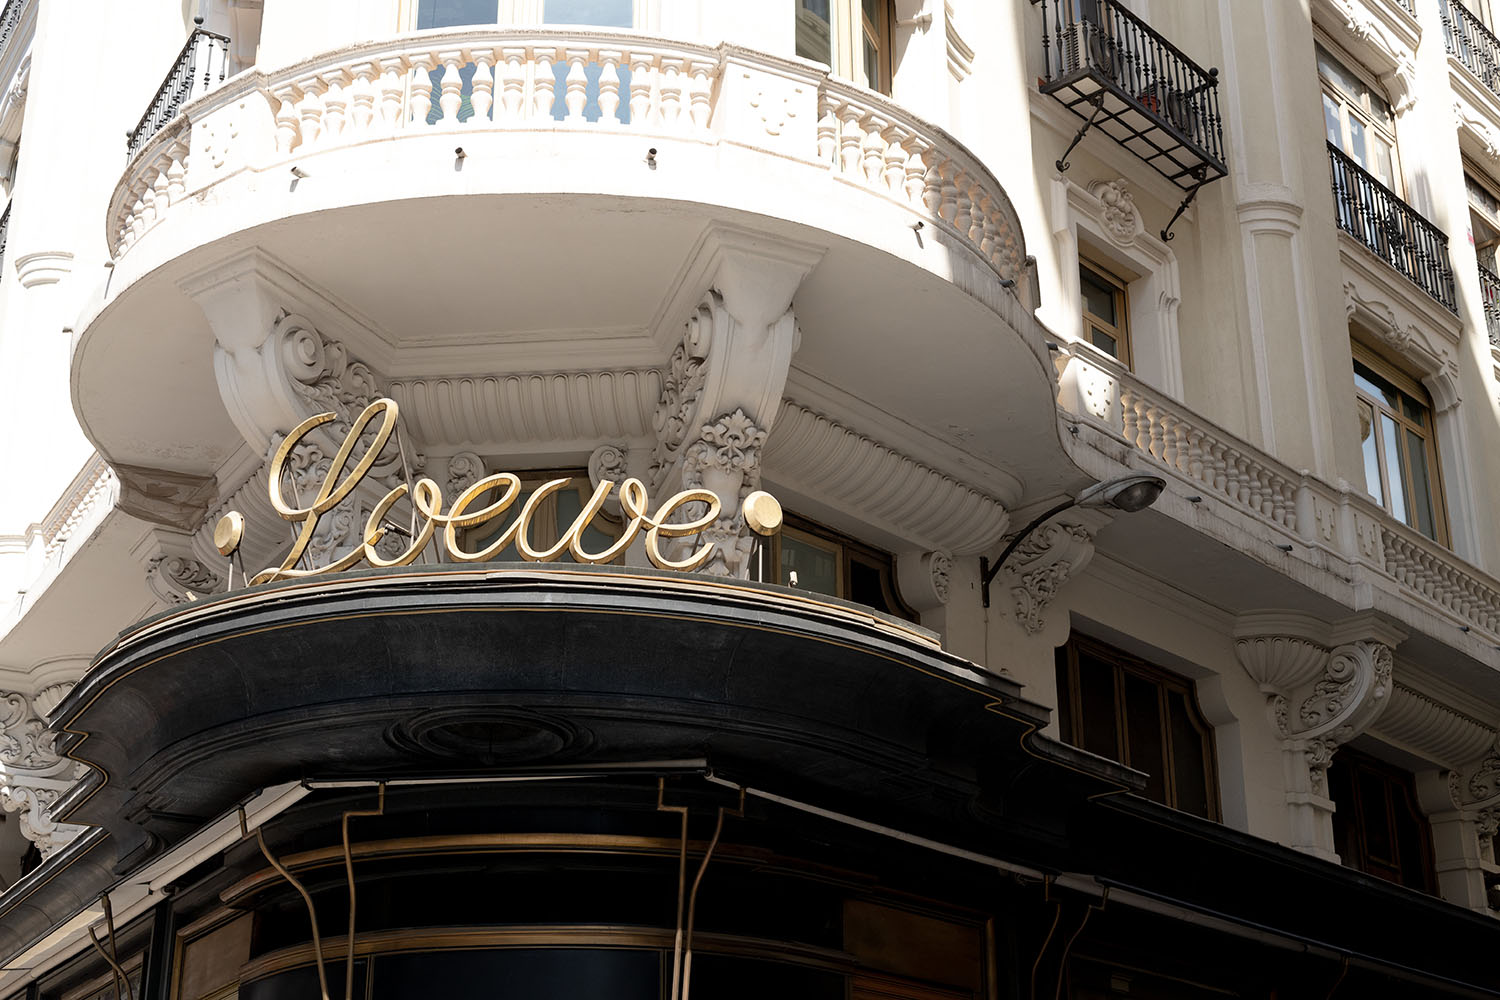 Coco & Voltaire - Loewe boutique sign on Gran Via in Madrid